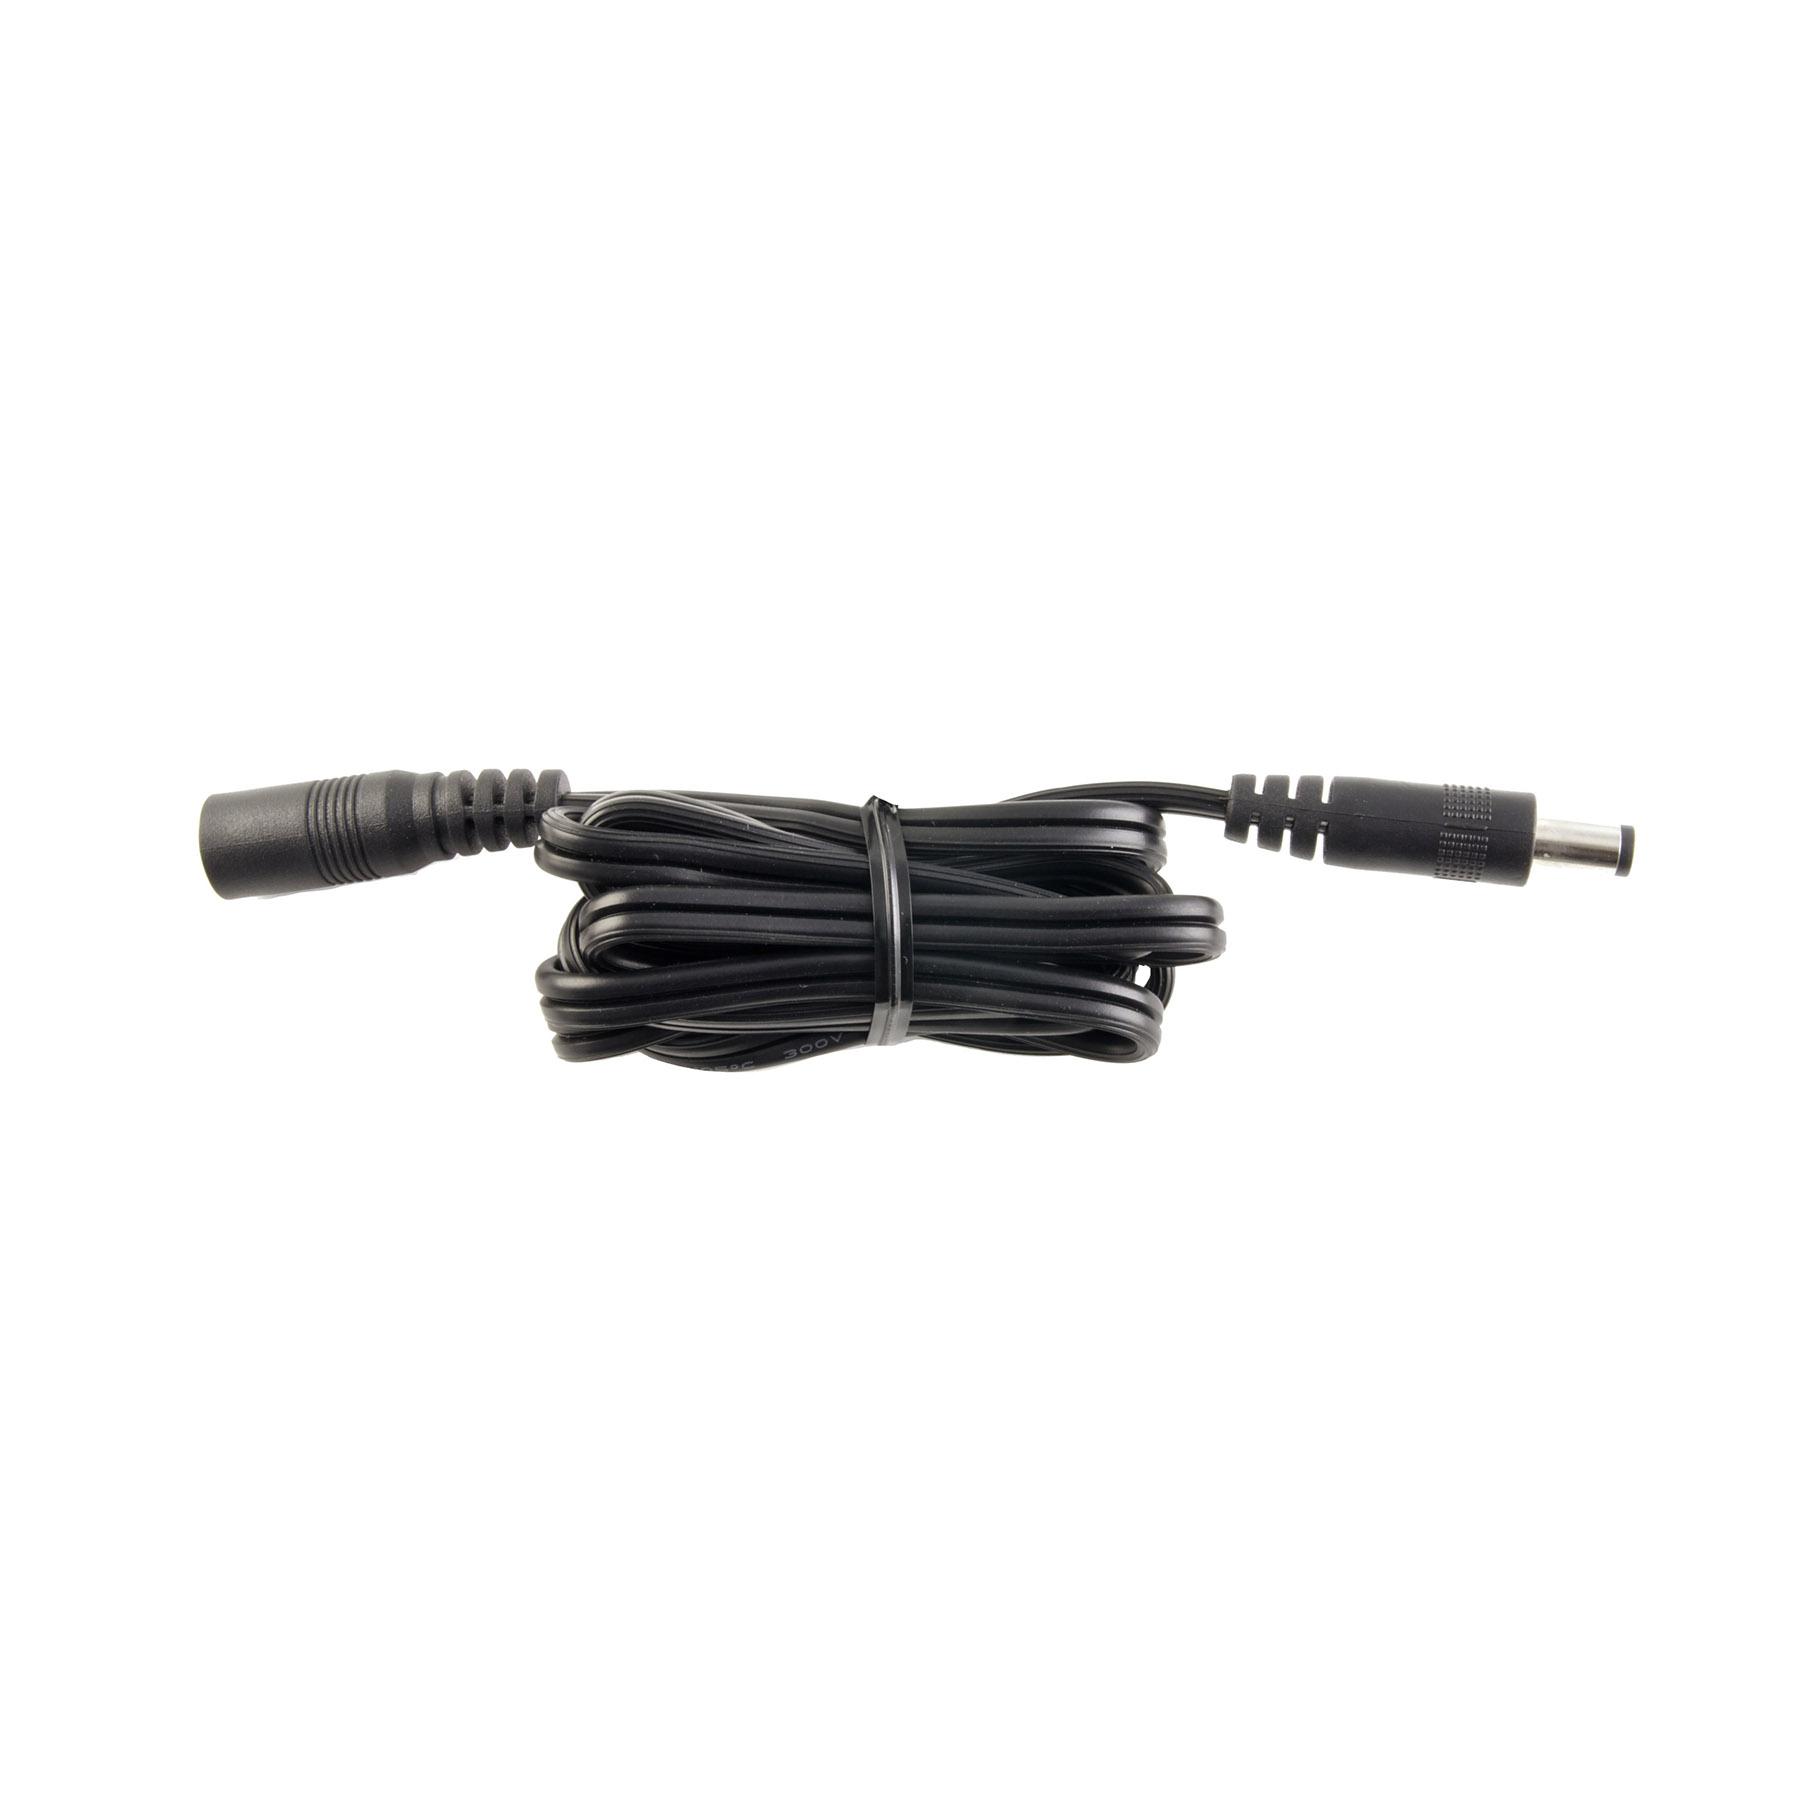 LED Extension Cable | DC Plug 1 Meter Extension Cable | Diode LED